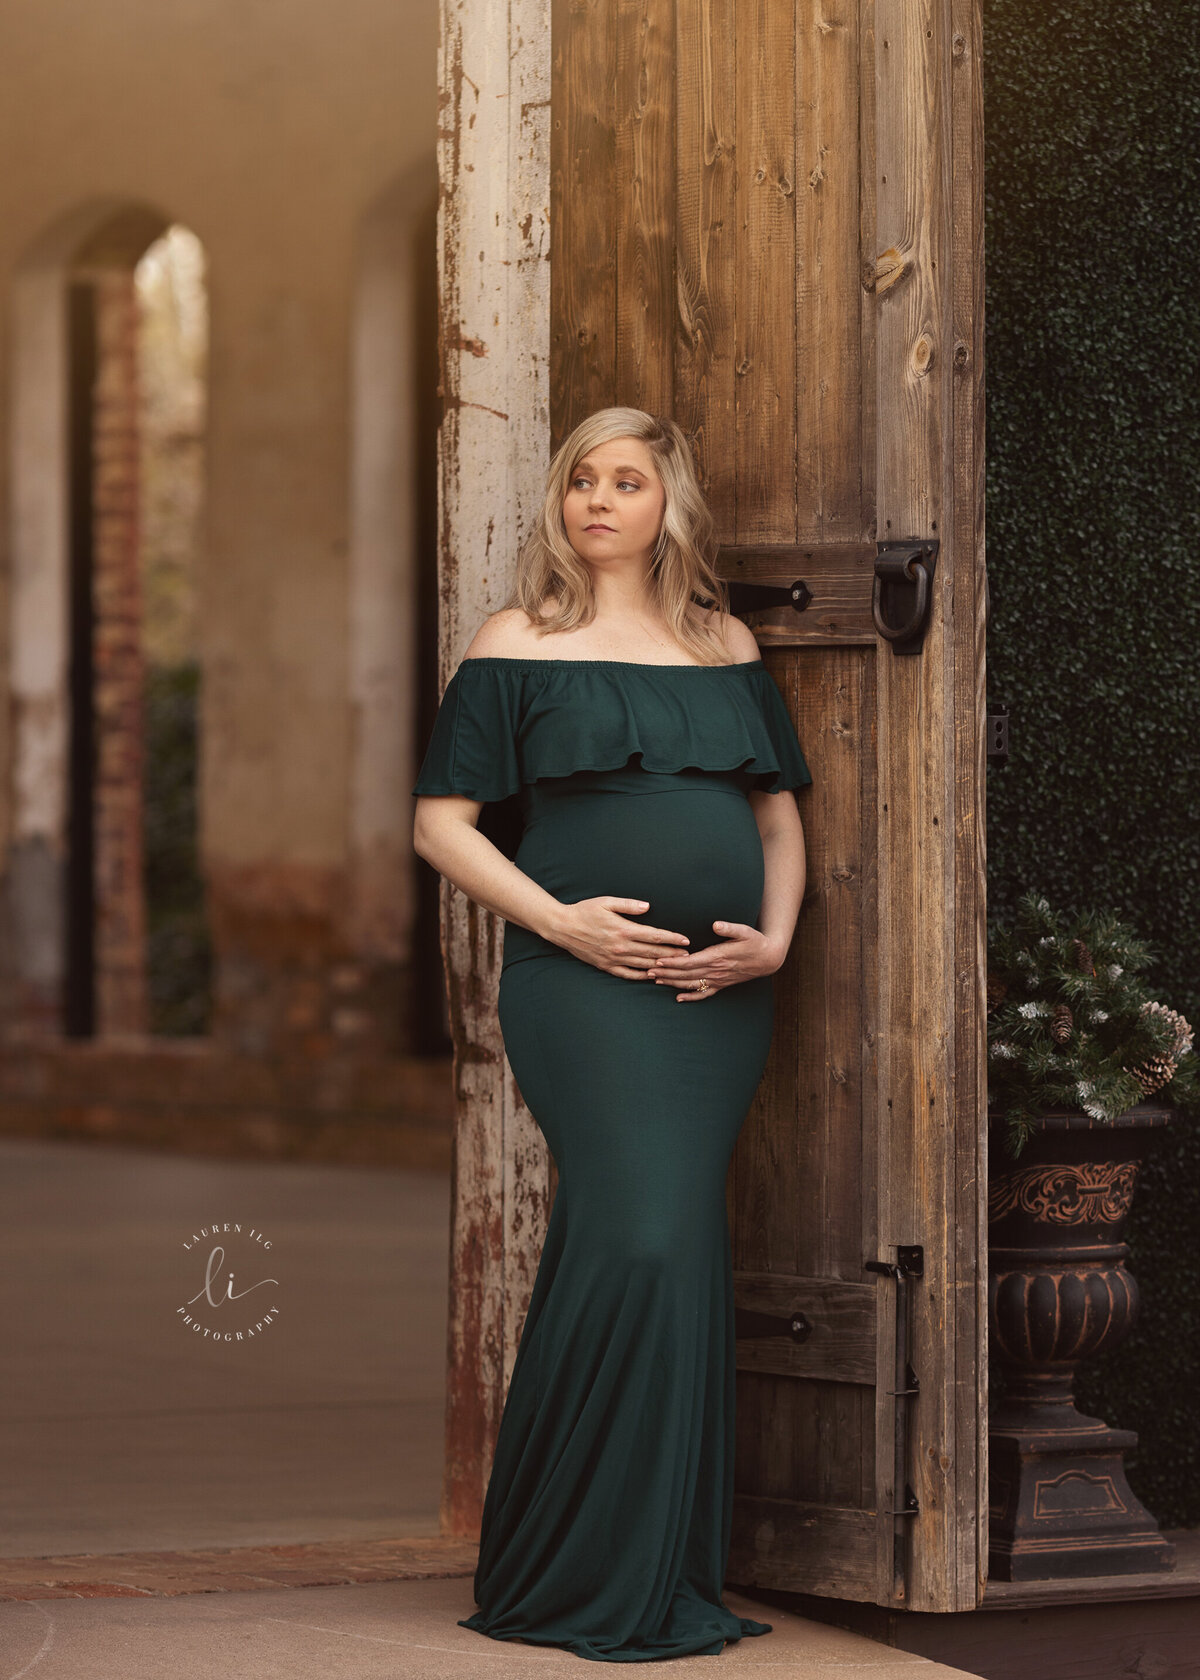 The Providence Cotton Mill maternity session mom standing by open door